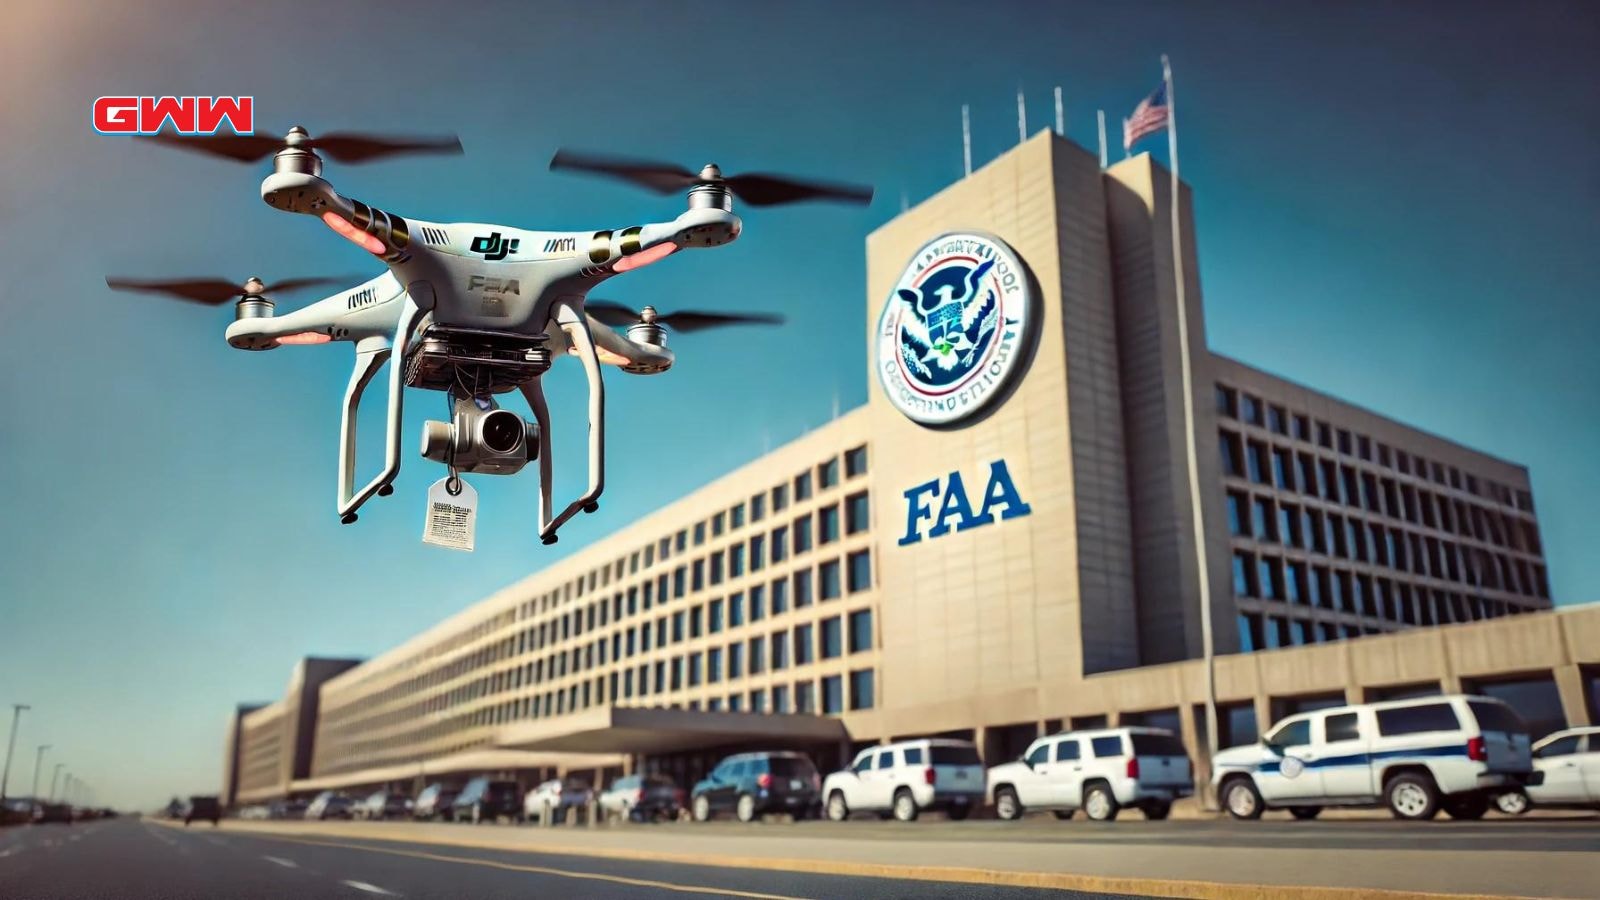 A wide image showing a DJI drone with a registration tag flying in front of an FAA (Federal Aviation Administration) building